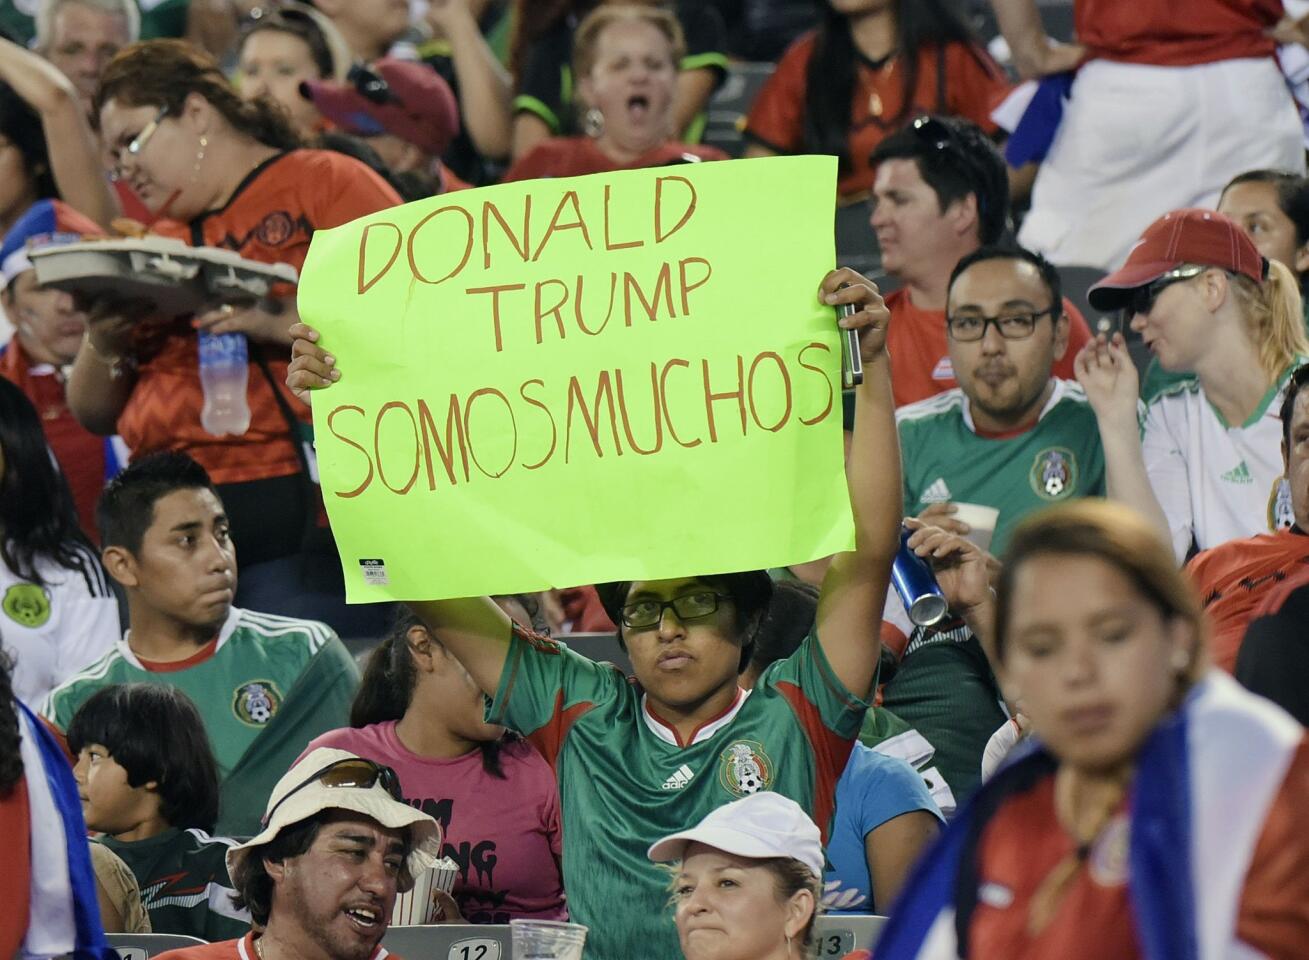 A fan holds a sign during the second half of a CONCACAF Gold Cup soccer match between Mexico and Costa Rica Sunday, July 19, 2015, at MetLife stadium in East Rutherford, N.J. (AP Photo/Bill Kostroun)